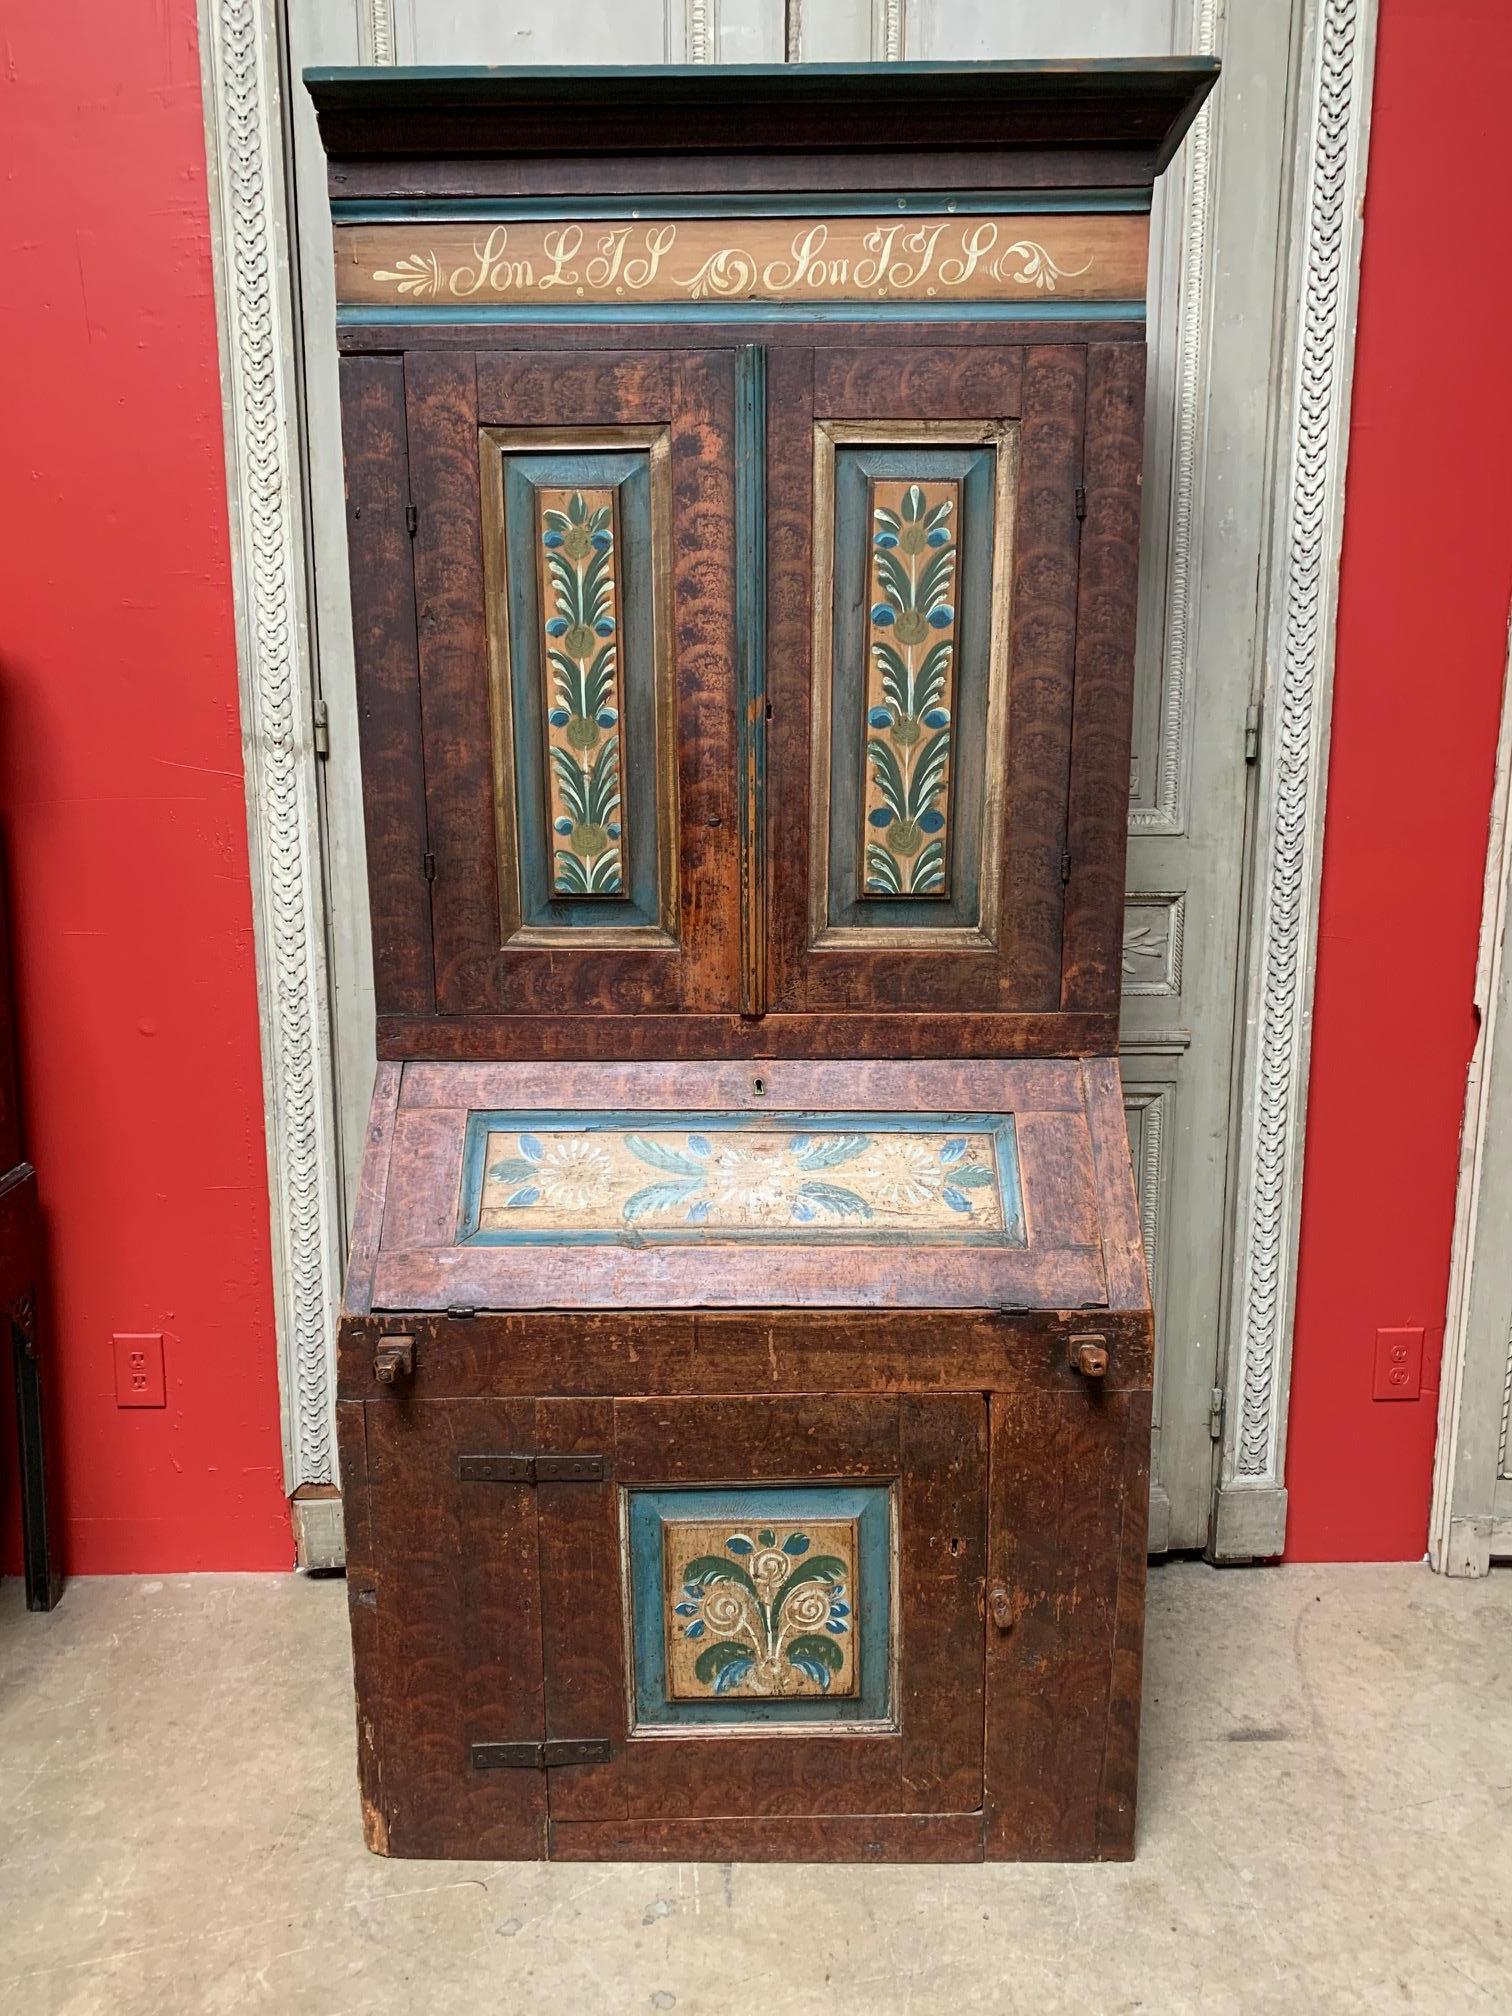 An 18th century Swedish painted secretary, all original.
This understated elegant piece has a beautiful wood patina with lovely hand painted details. Upper cabinet holds copious amounts of keepsakes and/or books, while the slant front lower section